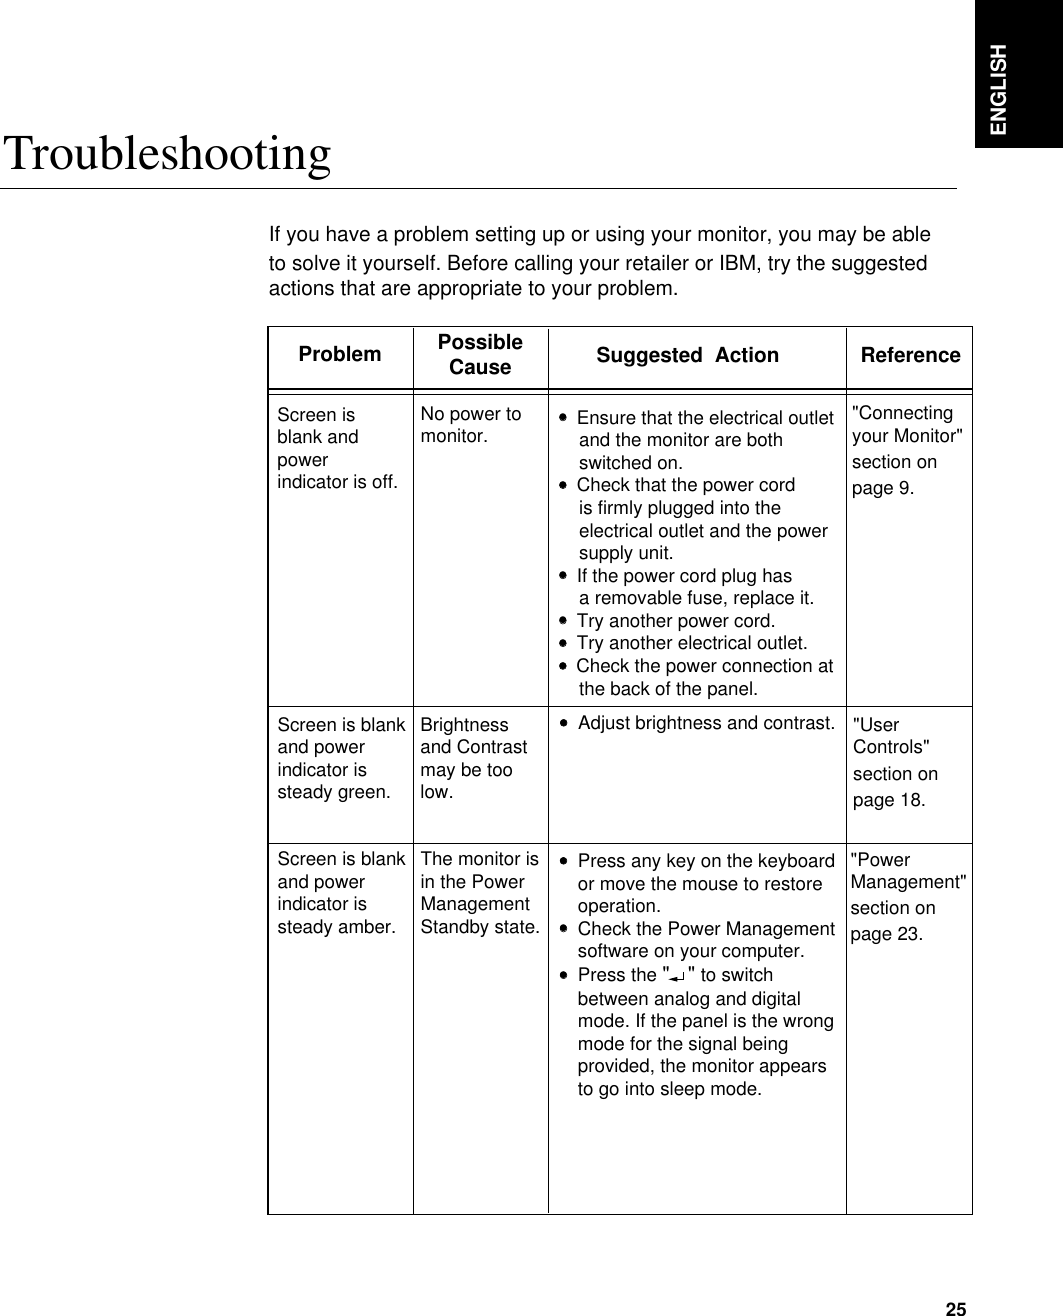 ENGLISH25TroubleshootingIf you have a problem setting up or using your monitor, you may be able to solve it yourself. Before calling your retailer or IBM, try the suggestedactions that are appropriate to your problem.ProblemNo power tomonitor.PossibleCause Suggested  Action  ReferenceBrightnessand Contrastmay be toolow.The monitor isin the PowerManagementStandby state.Screen isblank andpowerindicator is off.Screen is blankand powerindicator issteady green.Screen is blankand powerindicator issteady amber.&quot;UserControls&quot;section on page 18.&quot;PowerManagement&quot;section on page 23.&quot;Connectingyour Monitor&quot; section on  page 9.••Adjust brightness and contrast.••Press any key on the keyboardor move the mouse to restoreoperation.   ••Check the Power Managementsoftware on your computer.••Press the &quot; &quot; to switchbetween analog and digitalmode. If the panel is the wrongmode for the signal beingprovided, the monitor appearsto go into sleep mode.••  Ensure that the electrical outlet  and the monitor are both switched on.••  Check that the power cord is firmly plugged into theelectrical outlet and the powersupply unit.••  If the power cord plug has a removable fuse, replace it.••  Try another power cord.••  Try another electrical outlet.••    Check the power connection atthe back of the panel.